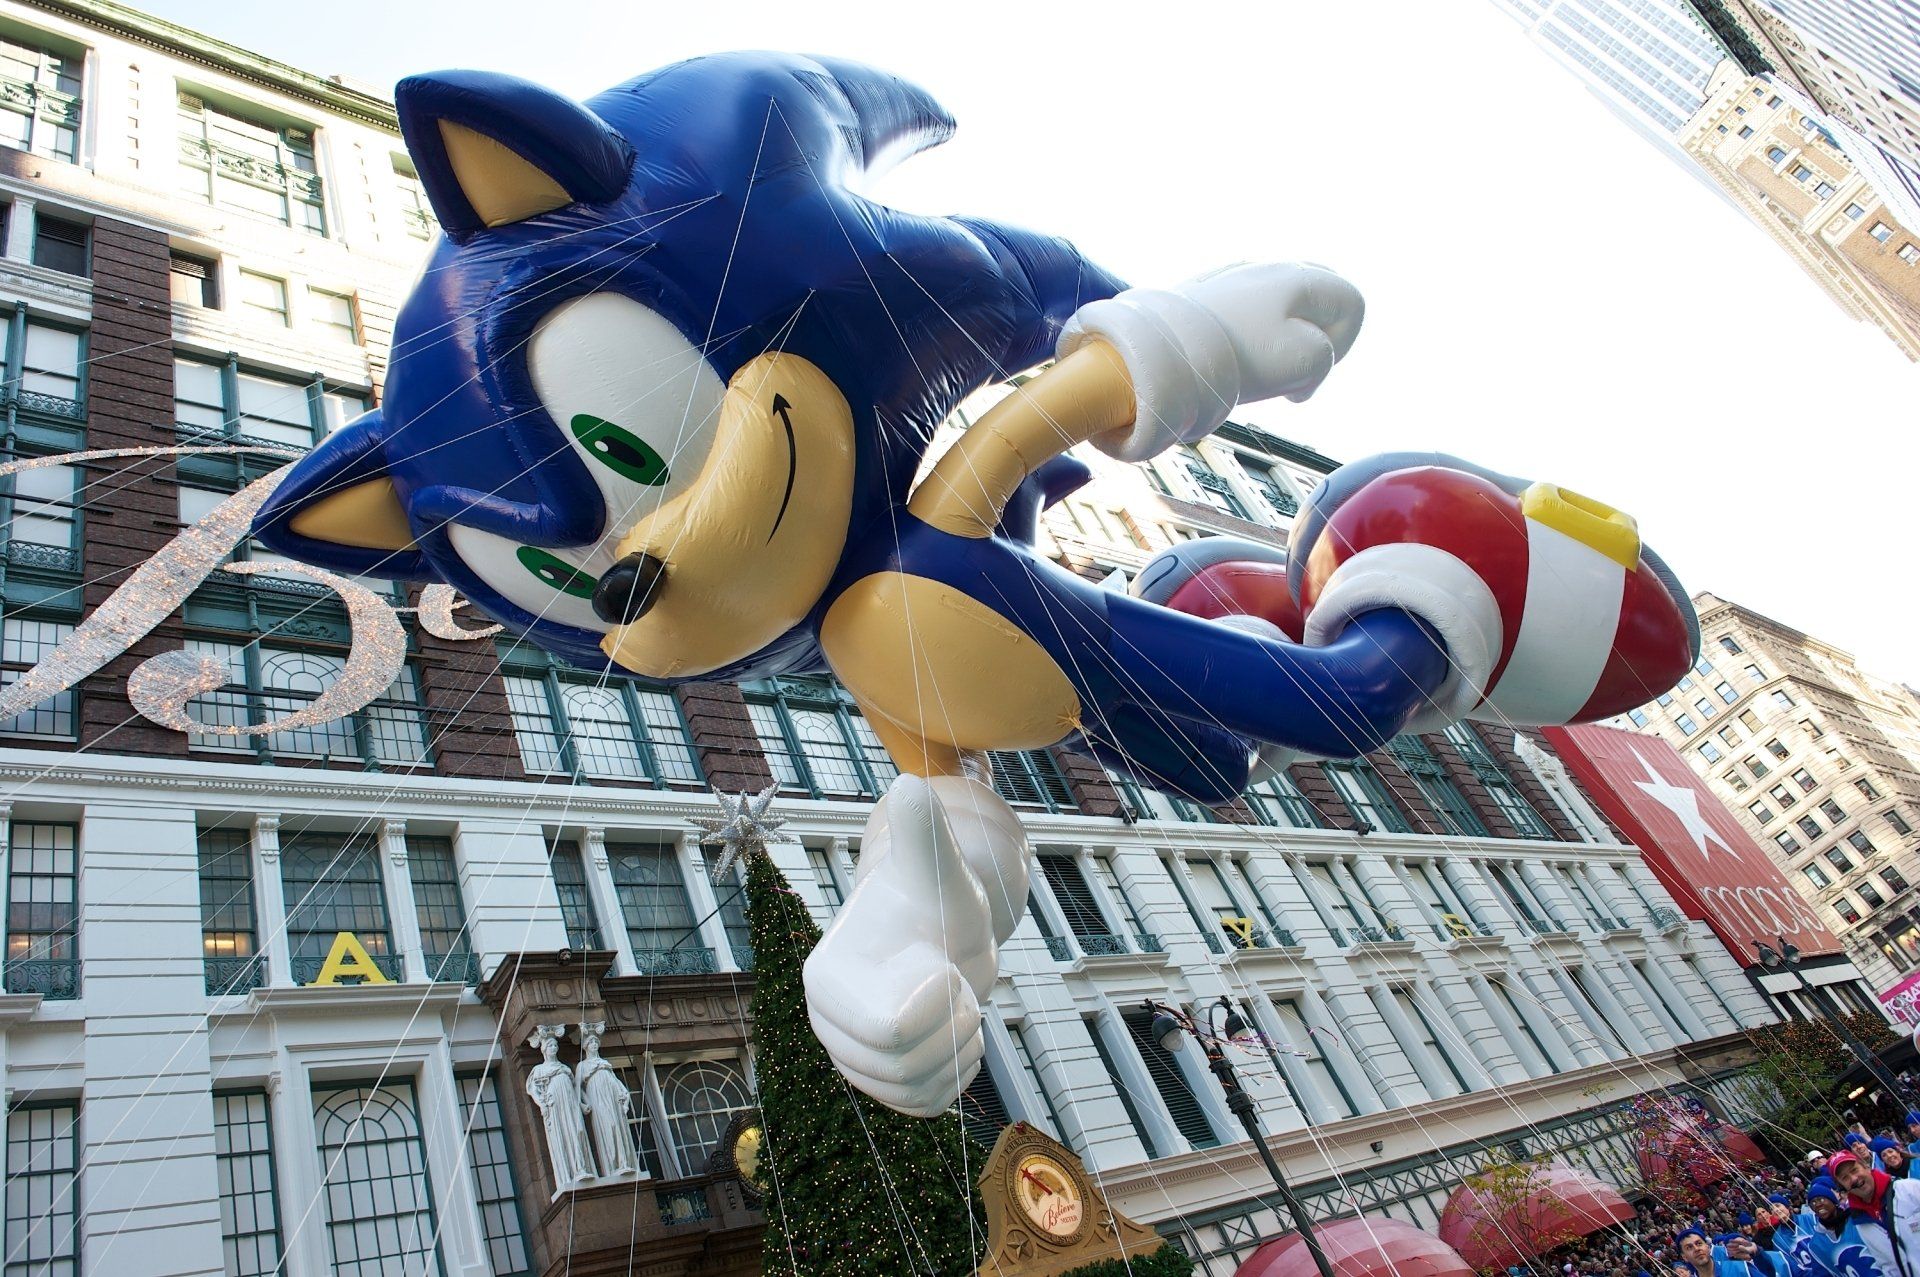 
Largest Thanksgiving Day Parade: Macy's Thanksgiving Day Parade sets world record